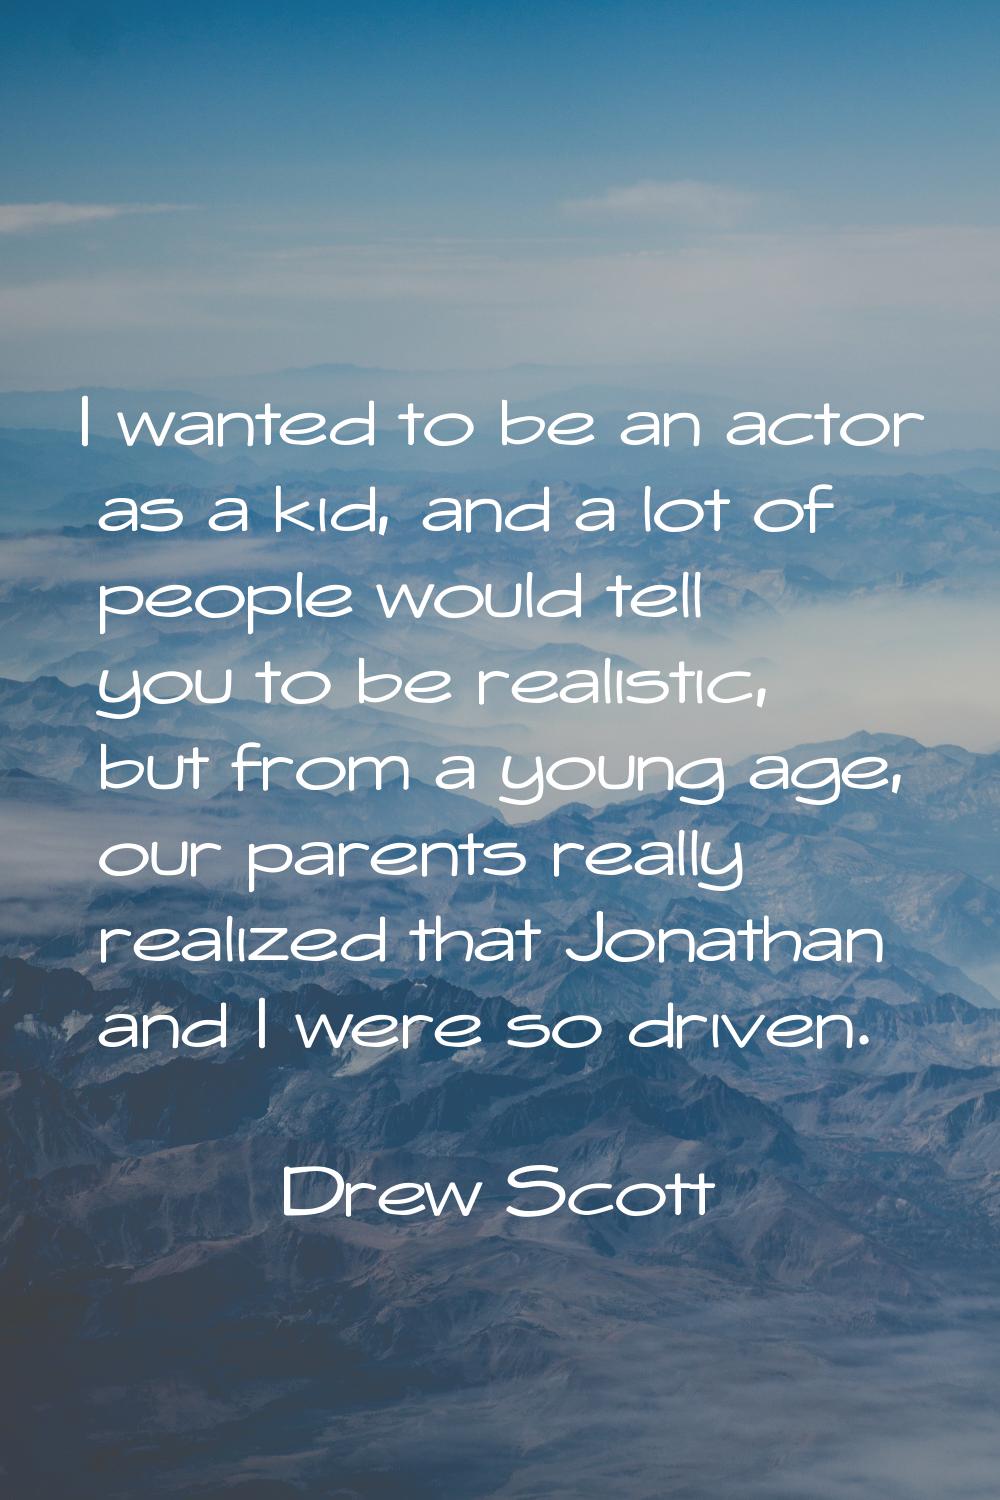 I wanted to be an actor as a kid, and a lot of people would tell you to be realistic, but from a yo